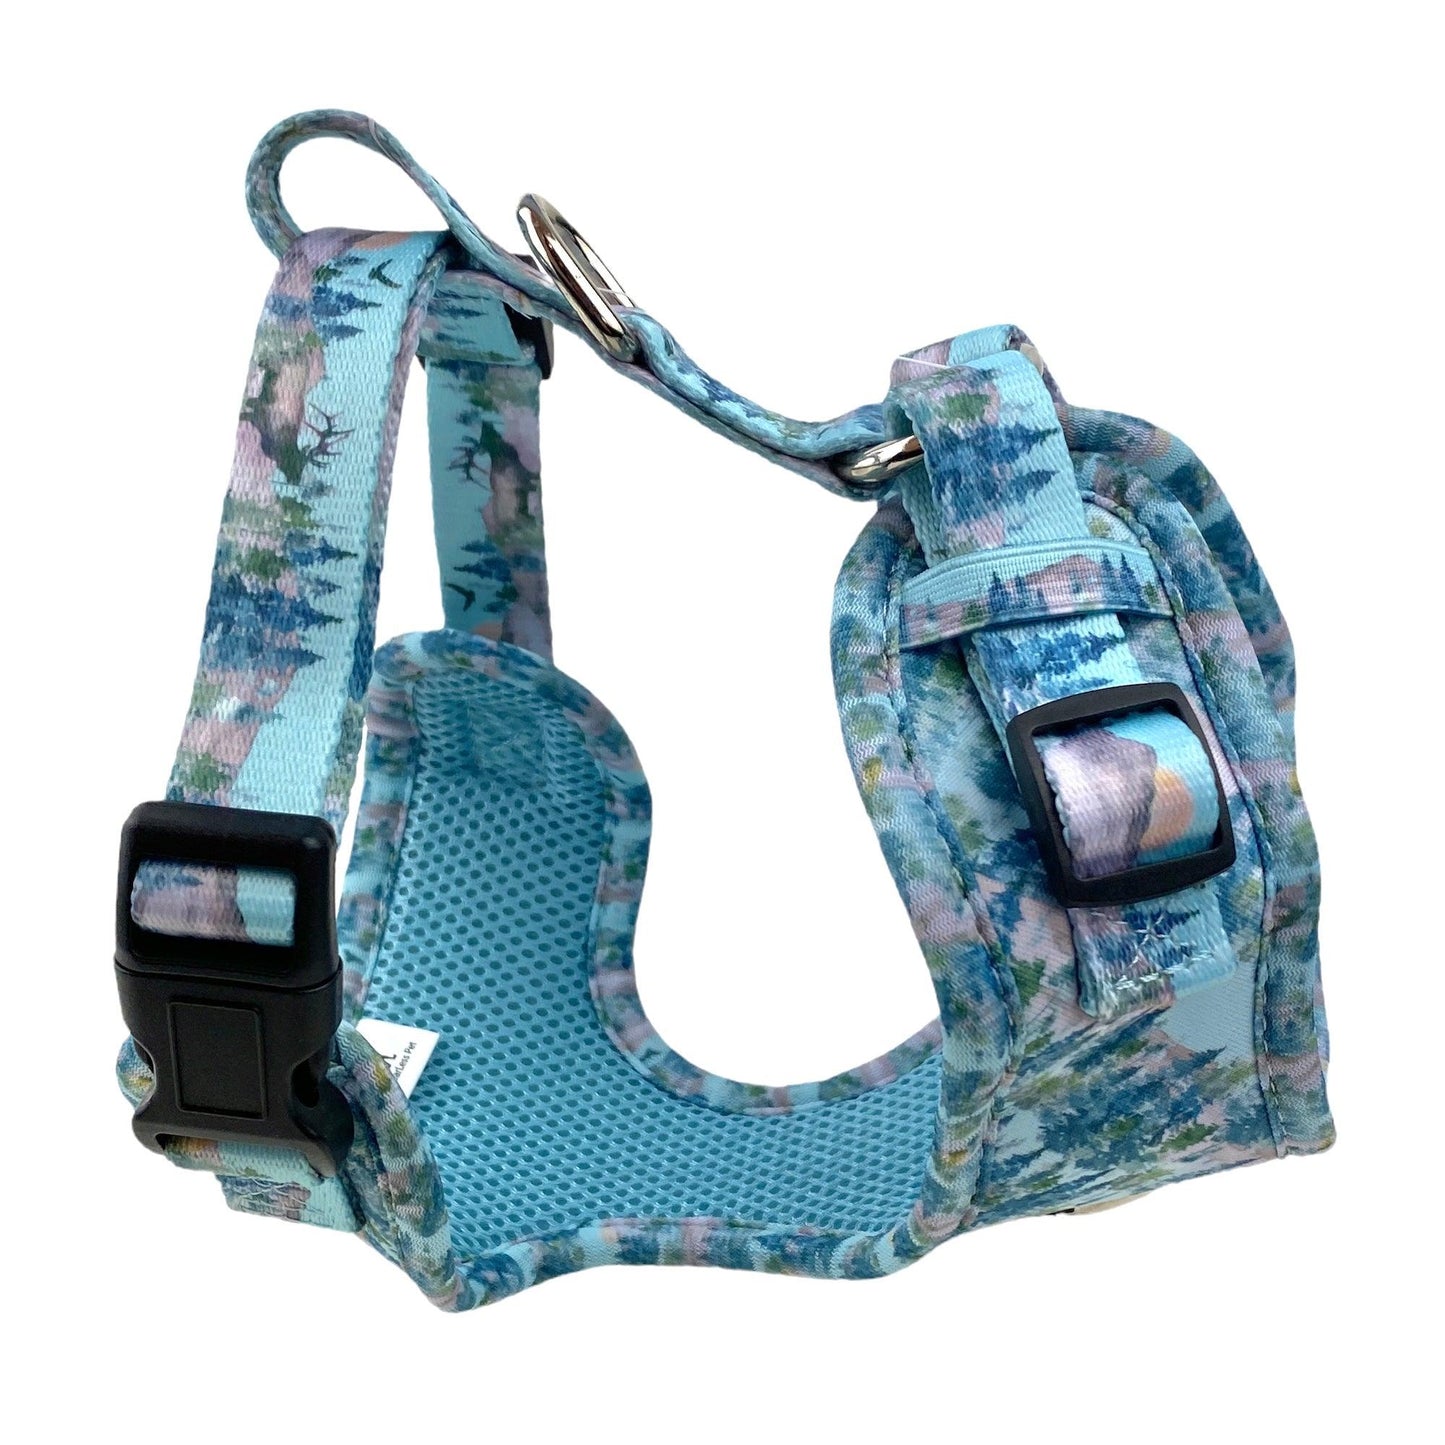 3D image of our padded adjustable dog harness in forest outdoor print